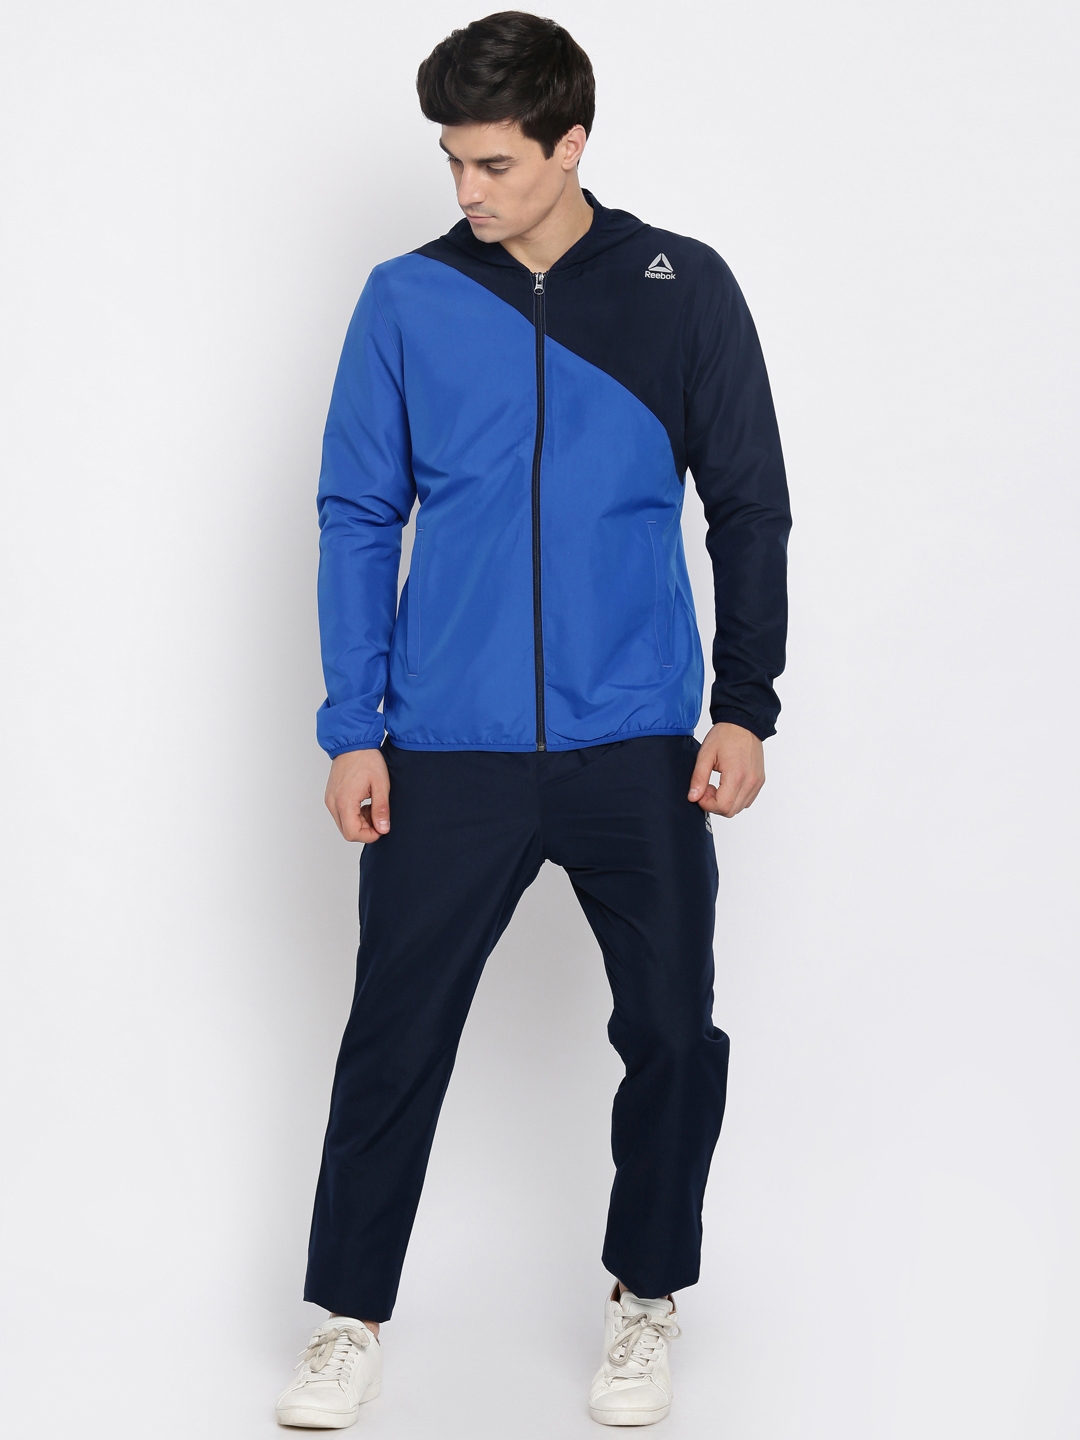 Buy Reebok Blue WOVEN Tracksuit - Tracksuits for Men 2037374 | Myntra